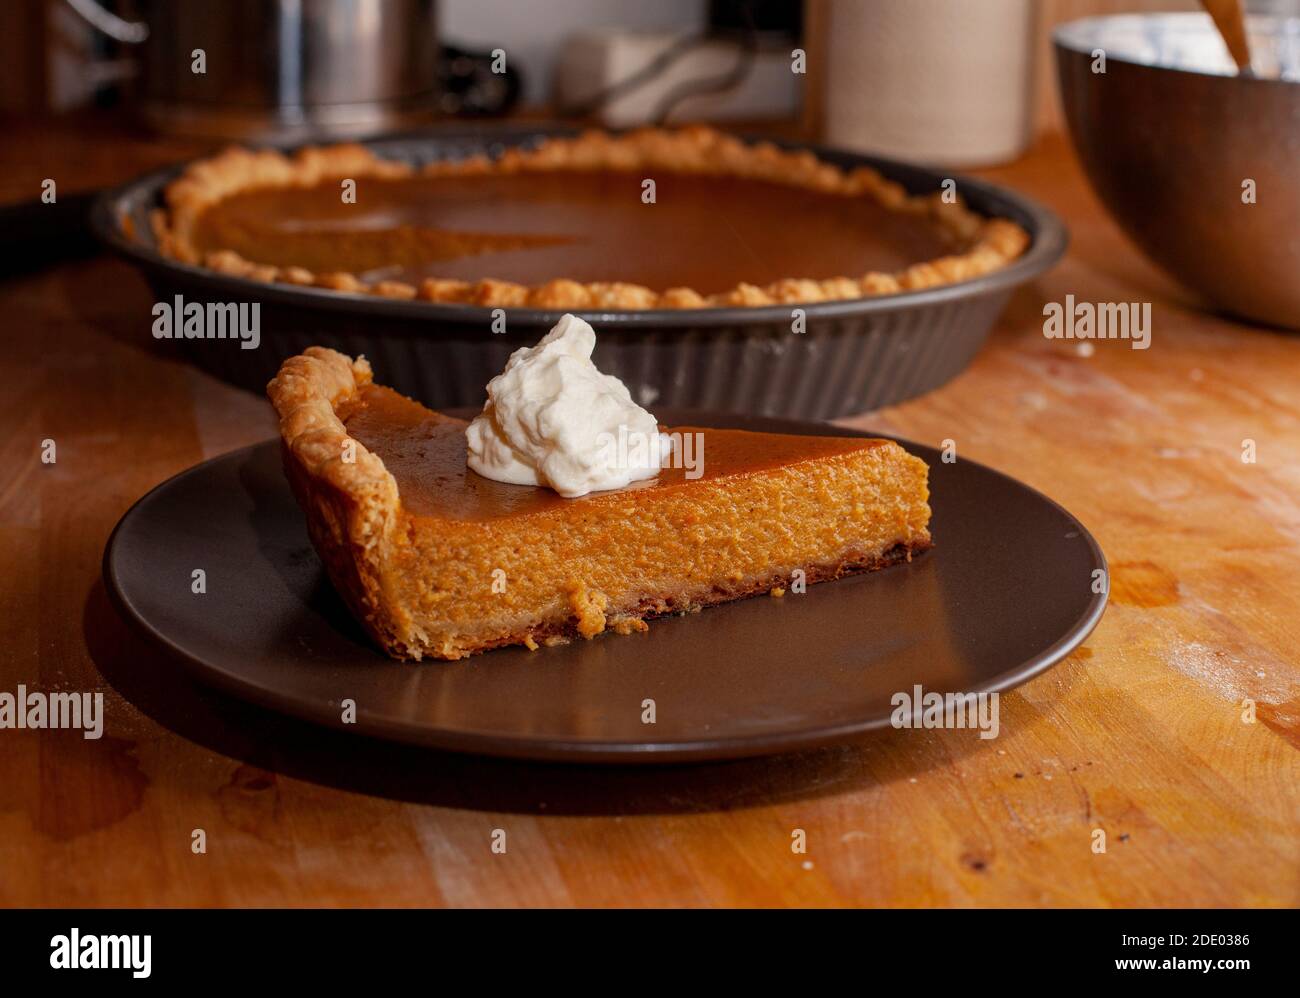 A slice of homemade pumpkin pie with a dollop of whipped cream sits on a plate on a wooden counter, with the rest of the pie in the background. Stock Photo